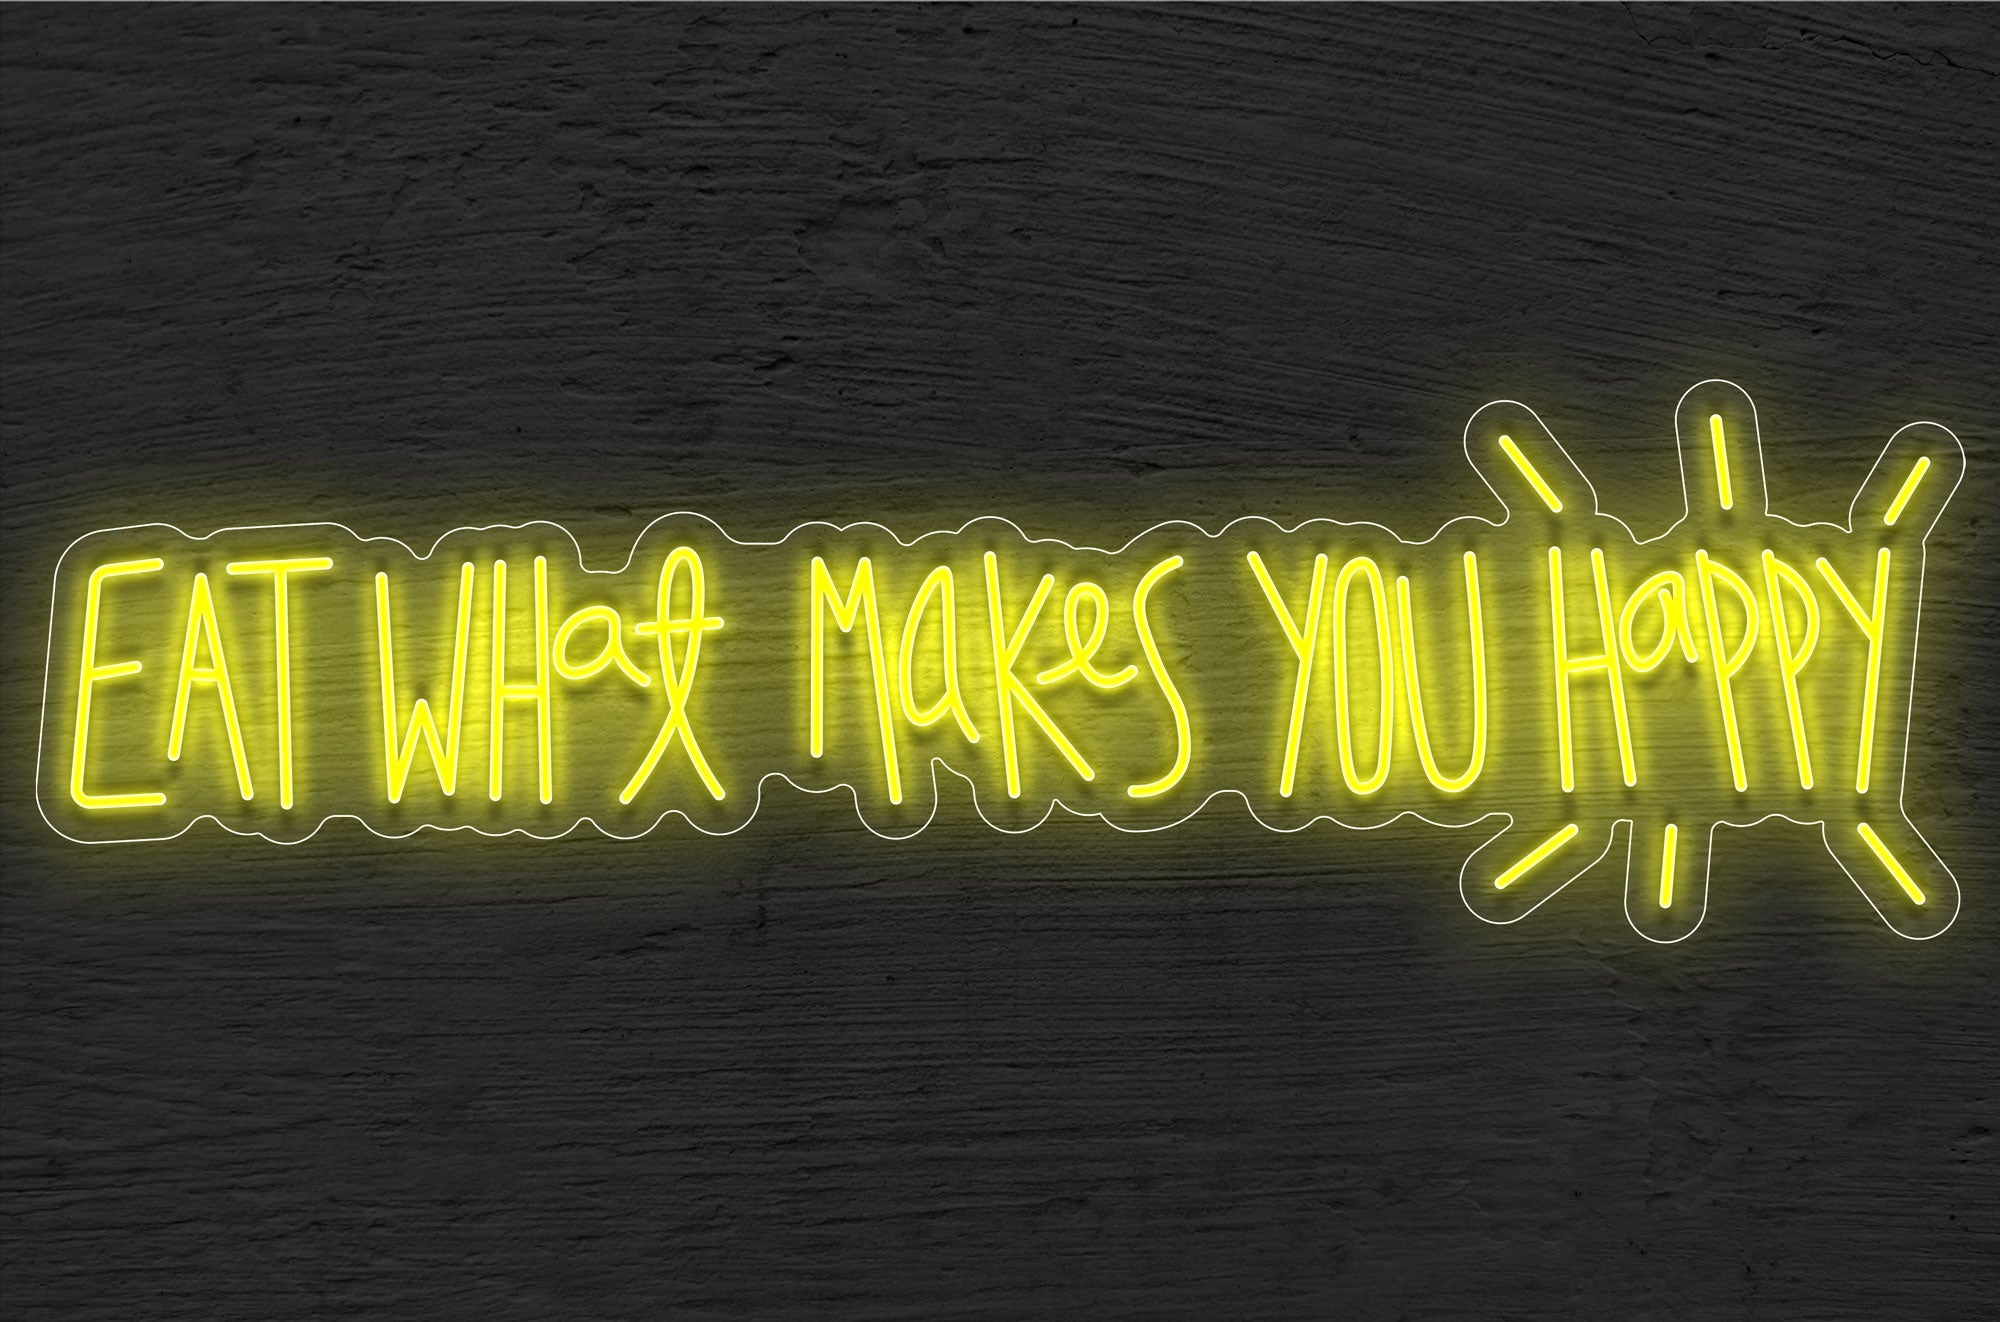 "Eat What Makes You Happy" LED Neon Sign